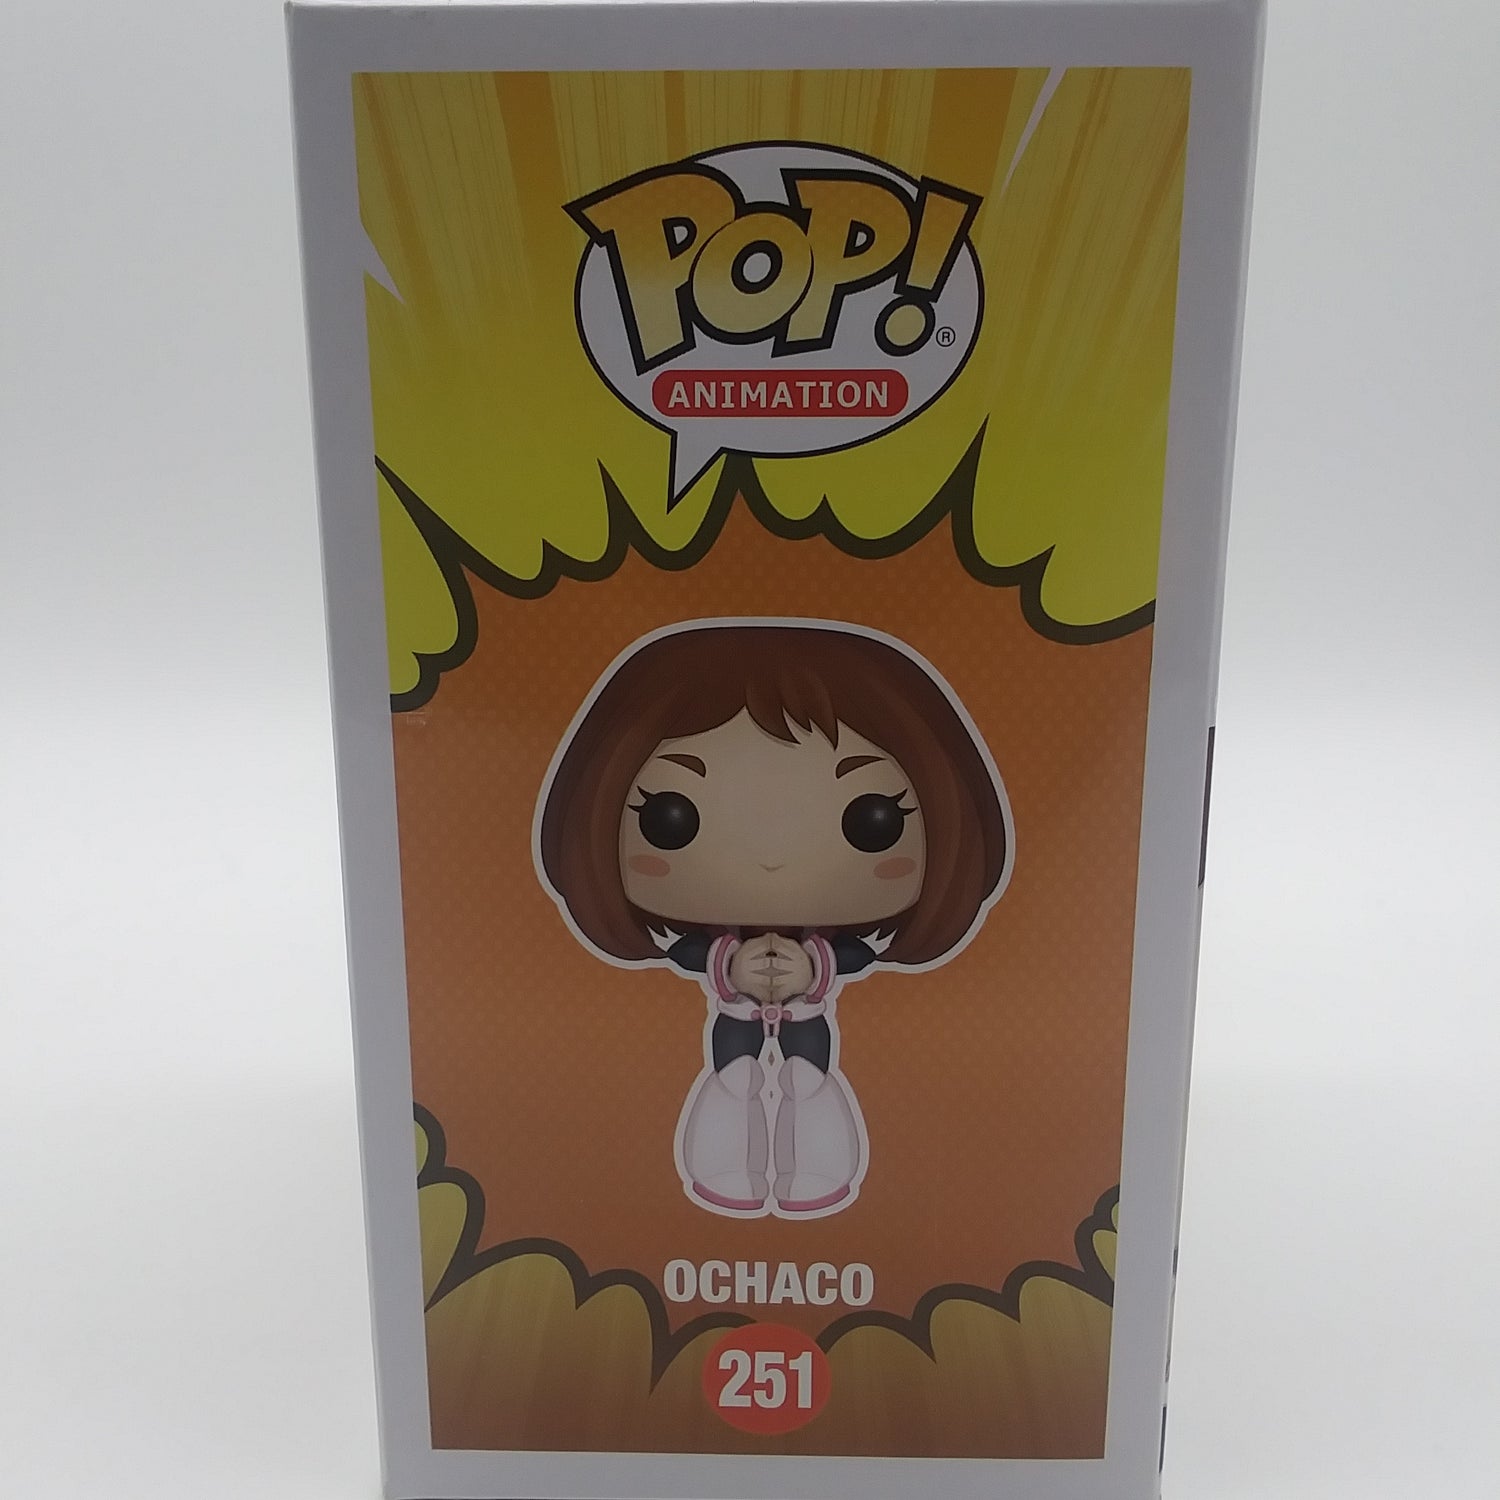 A picture of the right side of the cart and bubble. There is a picture of the figure on the side of the box, under her is her name and her box number, Ochaco and 251